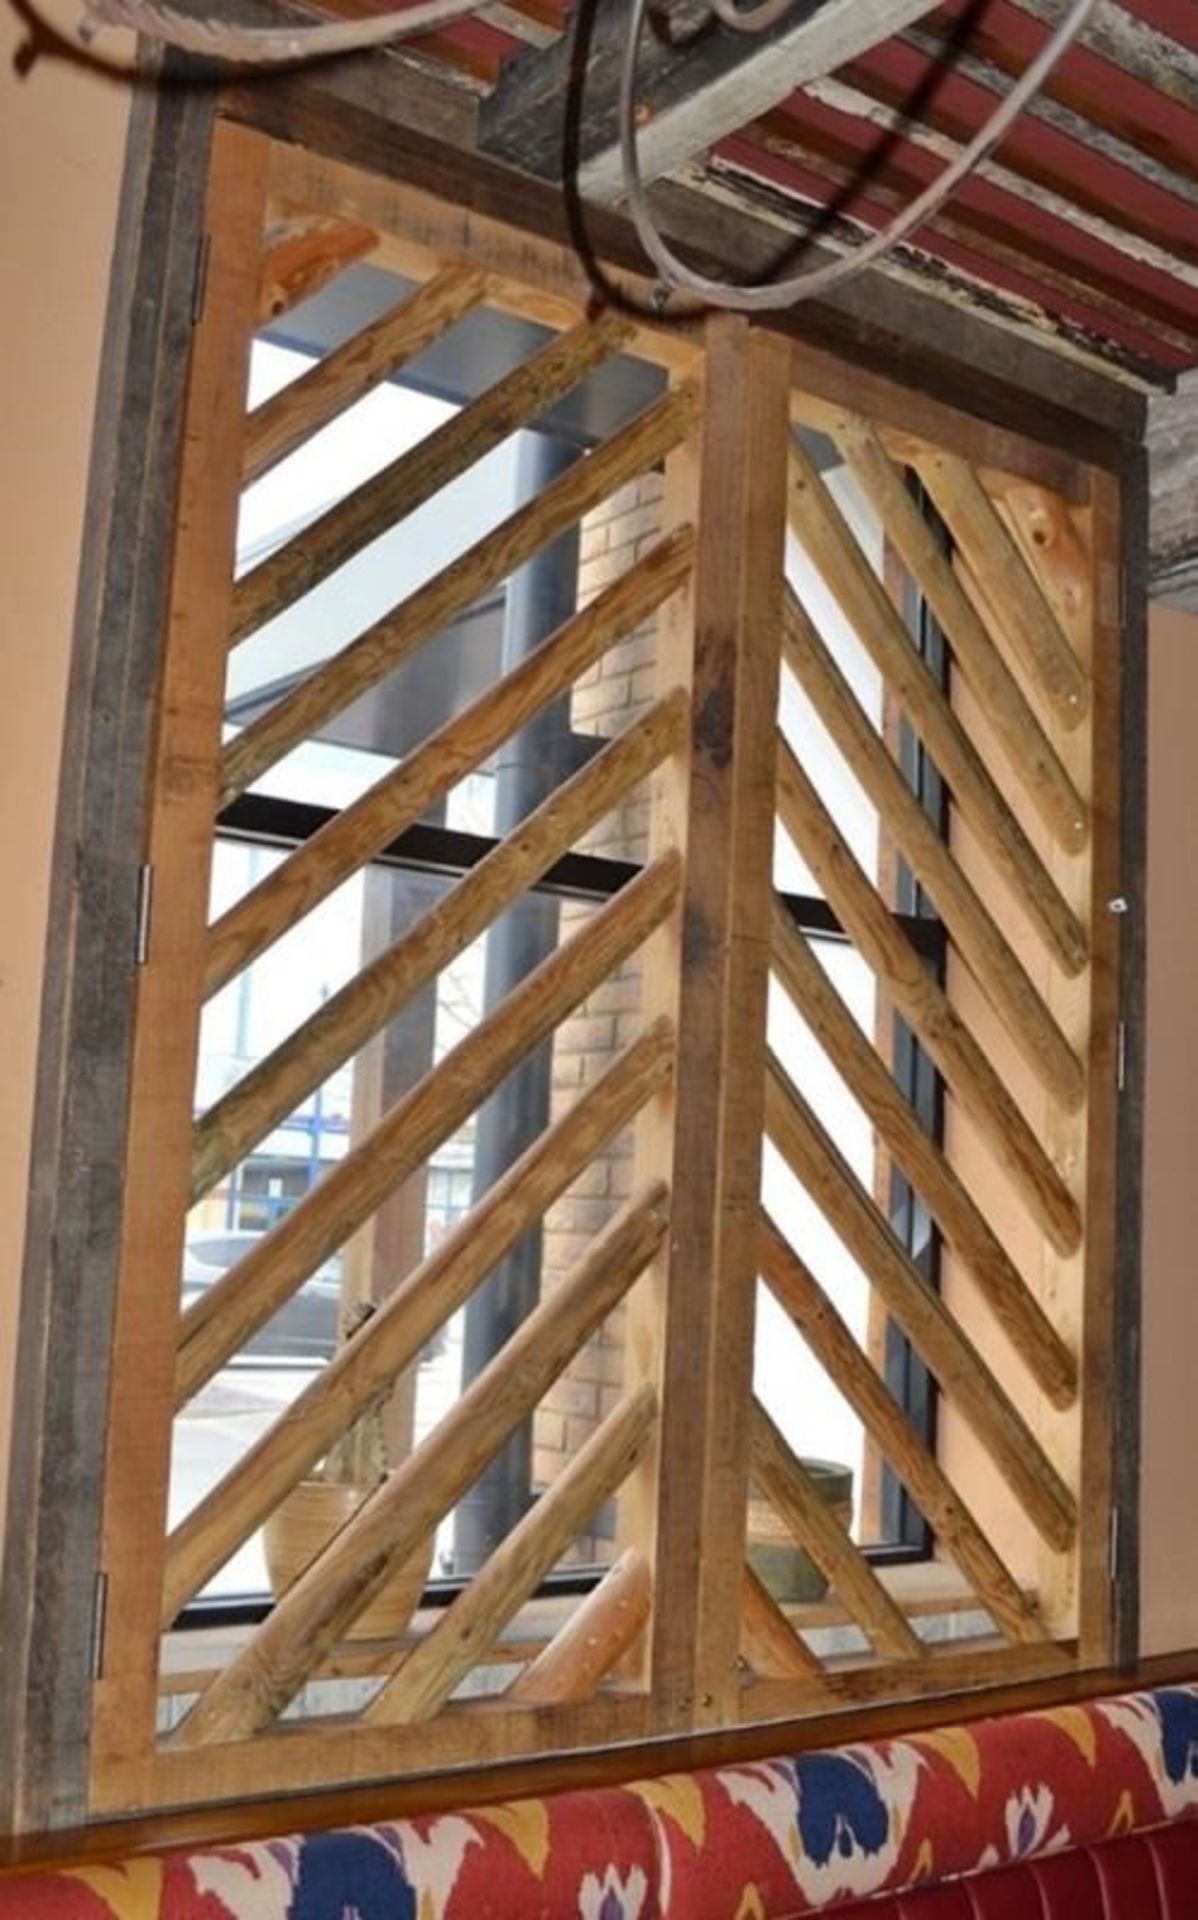 4 x Wooden Timber Window Shutters - Each Shutter Features Two Timber Frames With Round Wood - Image 2 of 5